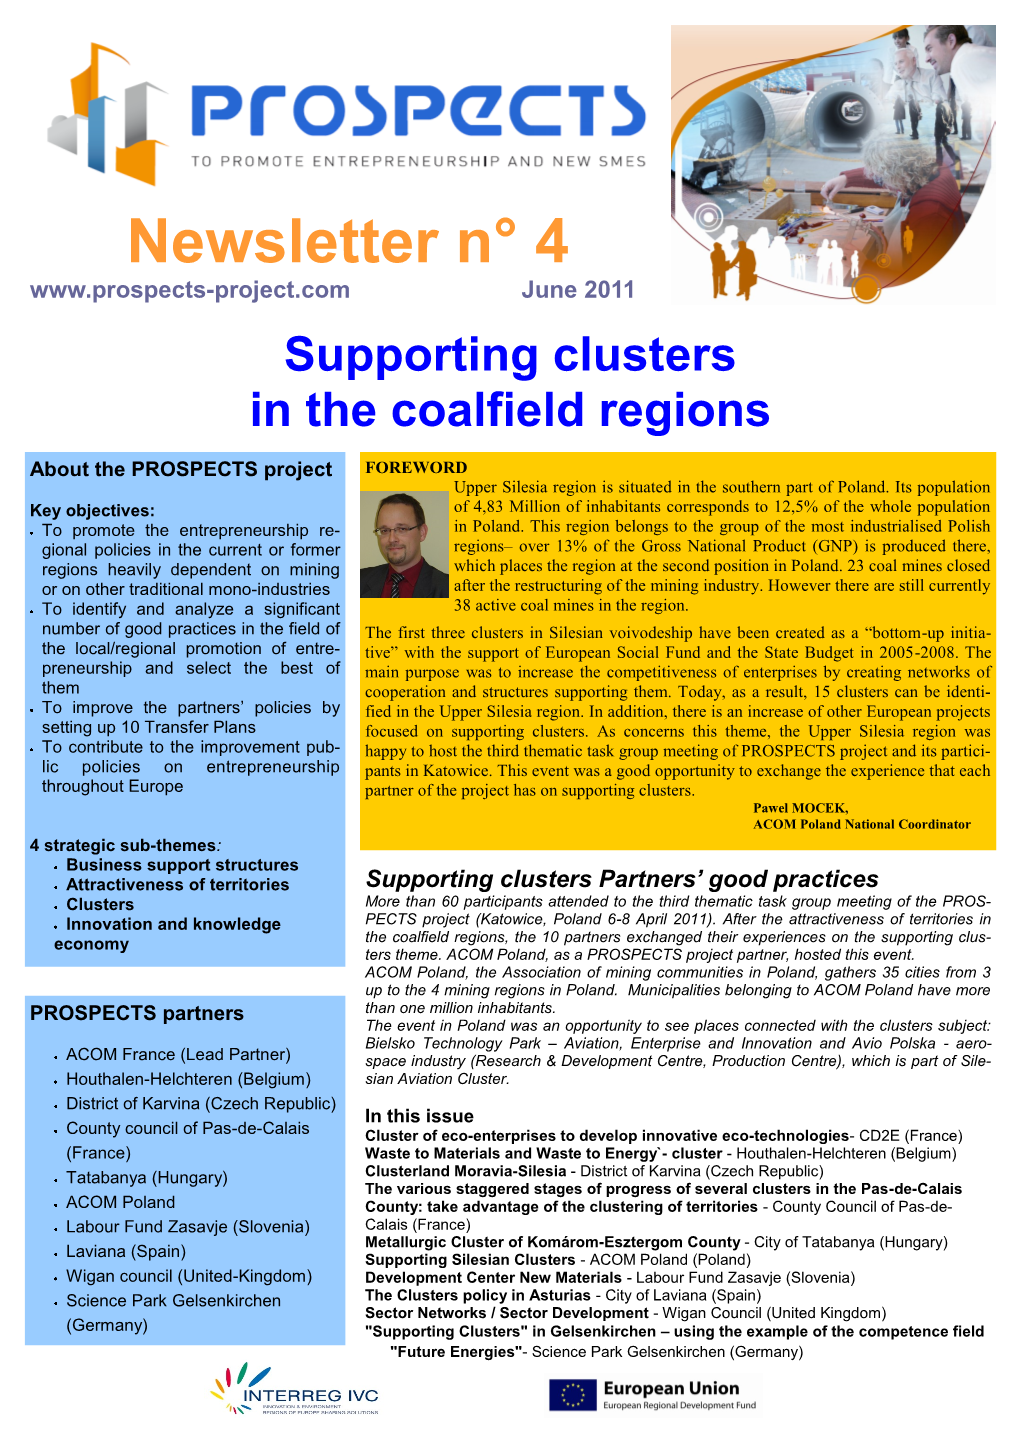 Newsletter N° 4 June 2011 Supporting Clusters in the Coalfield Regions